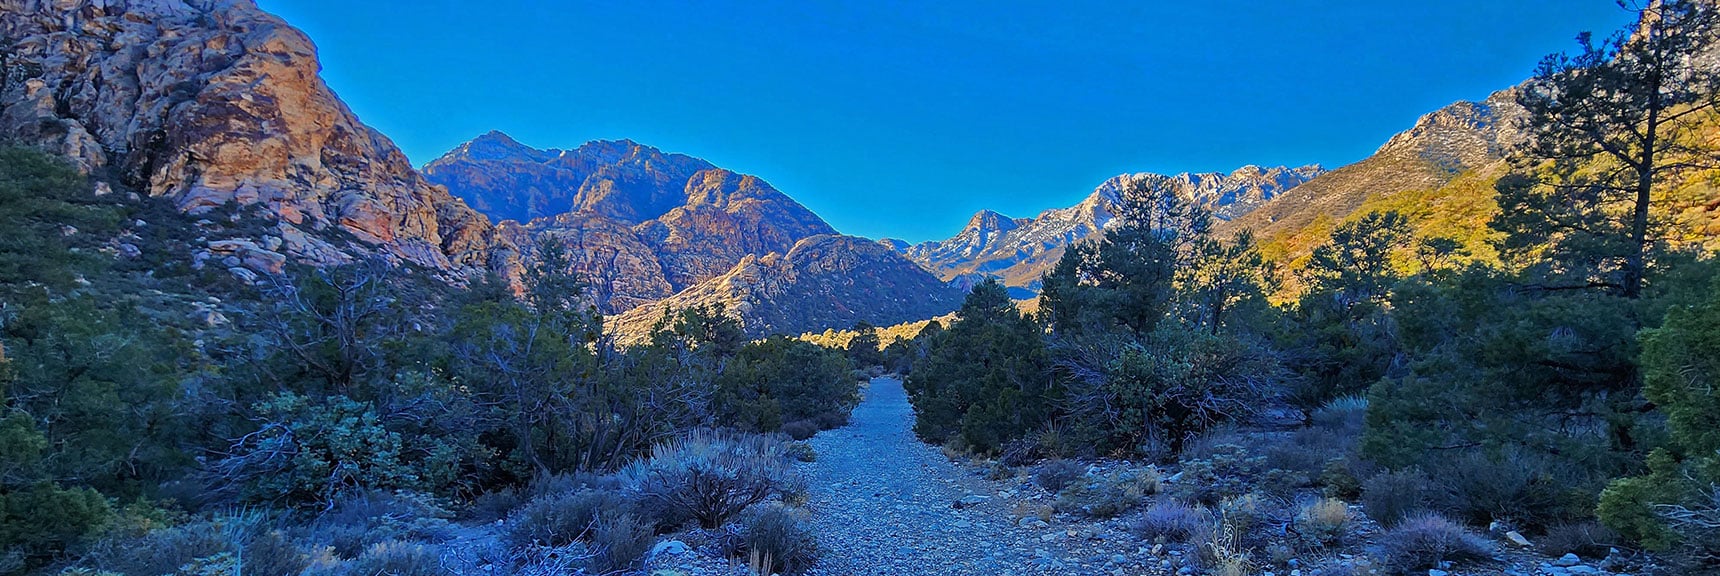 Three Great Wilderness Areas: Red Rock Canyon, La Madre & Rainbow Mountain Wilderness | White Rock Mountain Loop Trail | Red Rock Canyon, Nevada